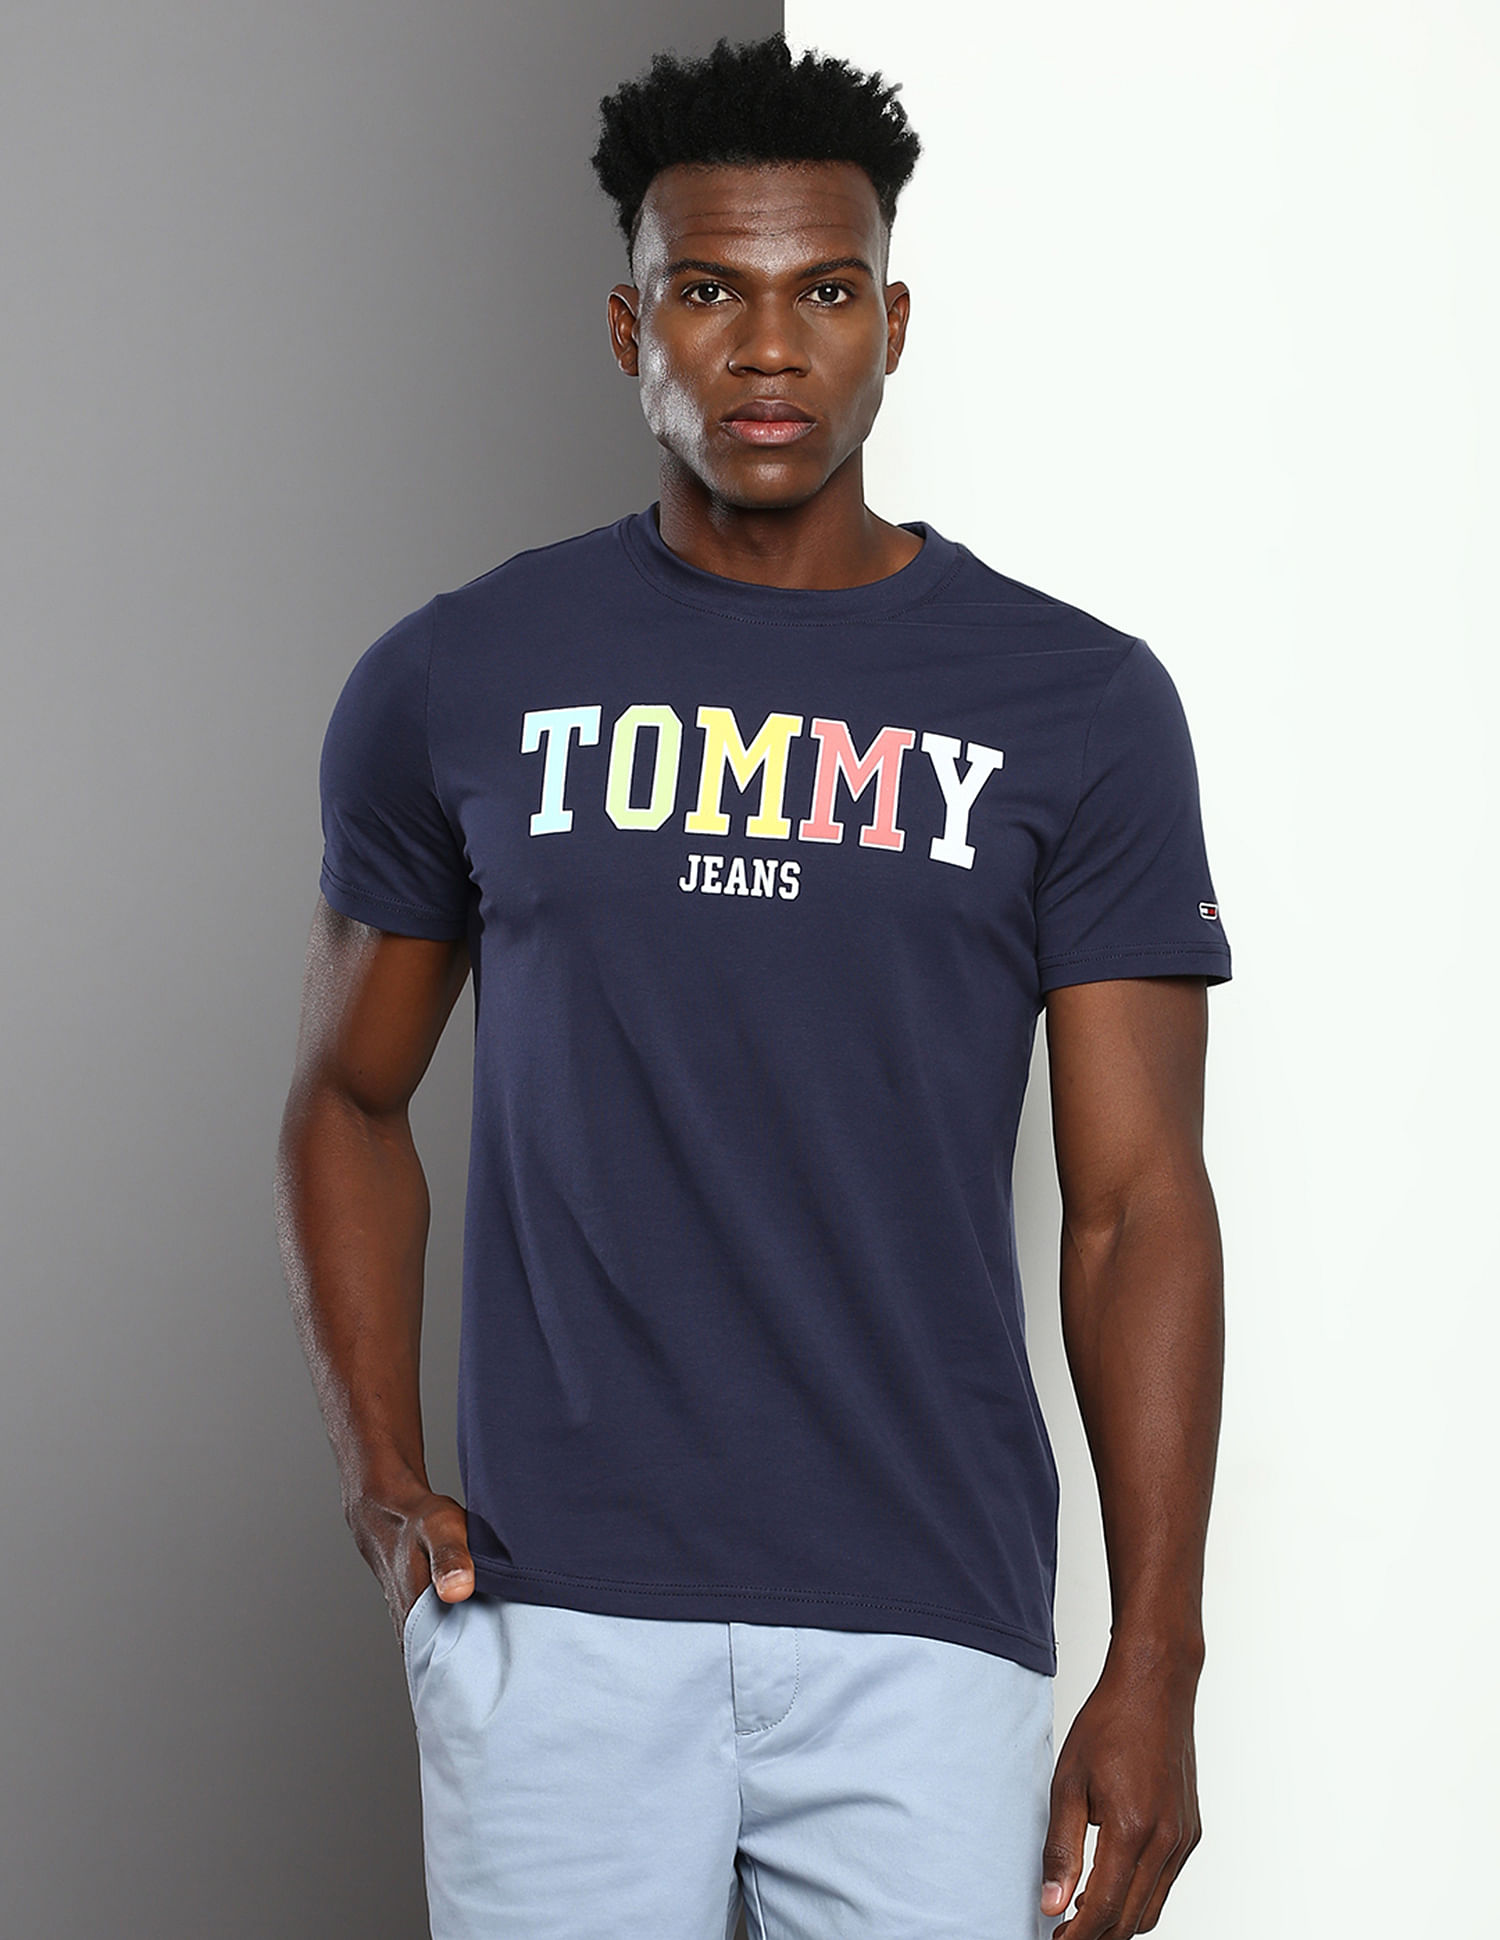 MIX ANY 2 READ -NWT-Tommy Hilfiger College Logo Tommy Jeans Blue Polo  T-Shirt